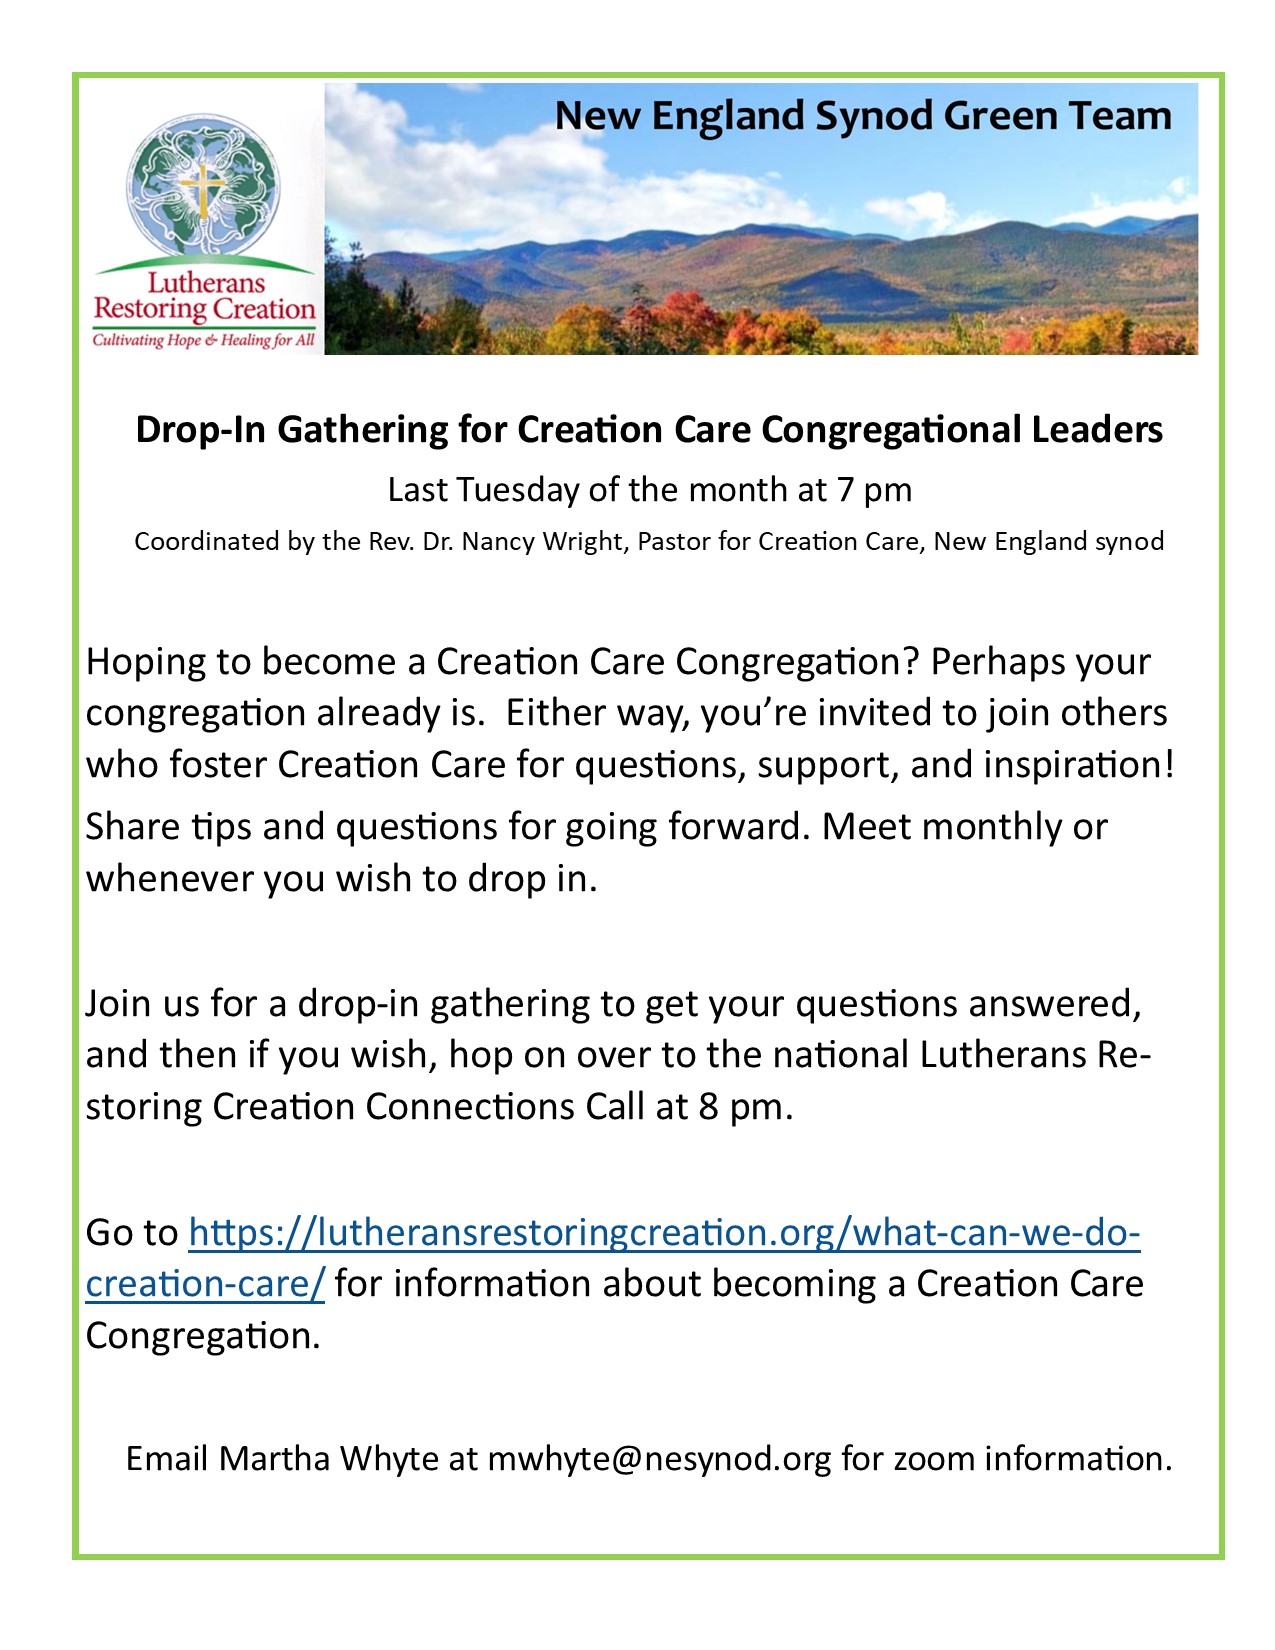 Drop In Gathering for Congregational Care Leaders flyer